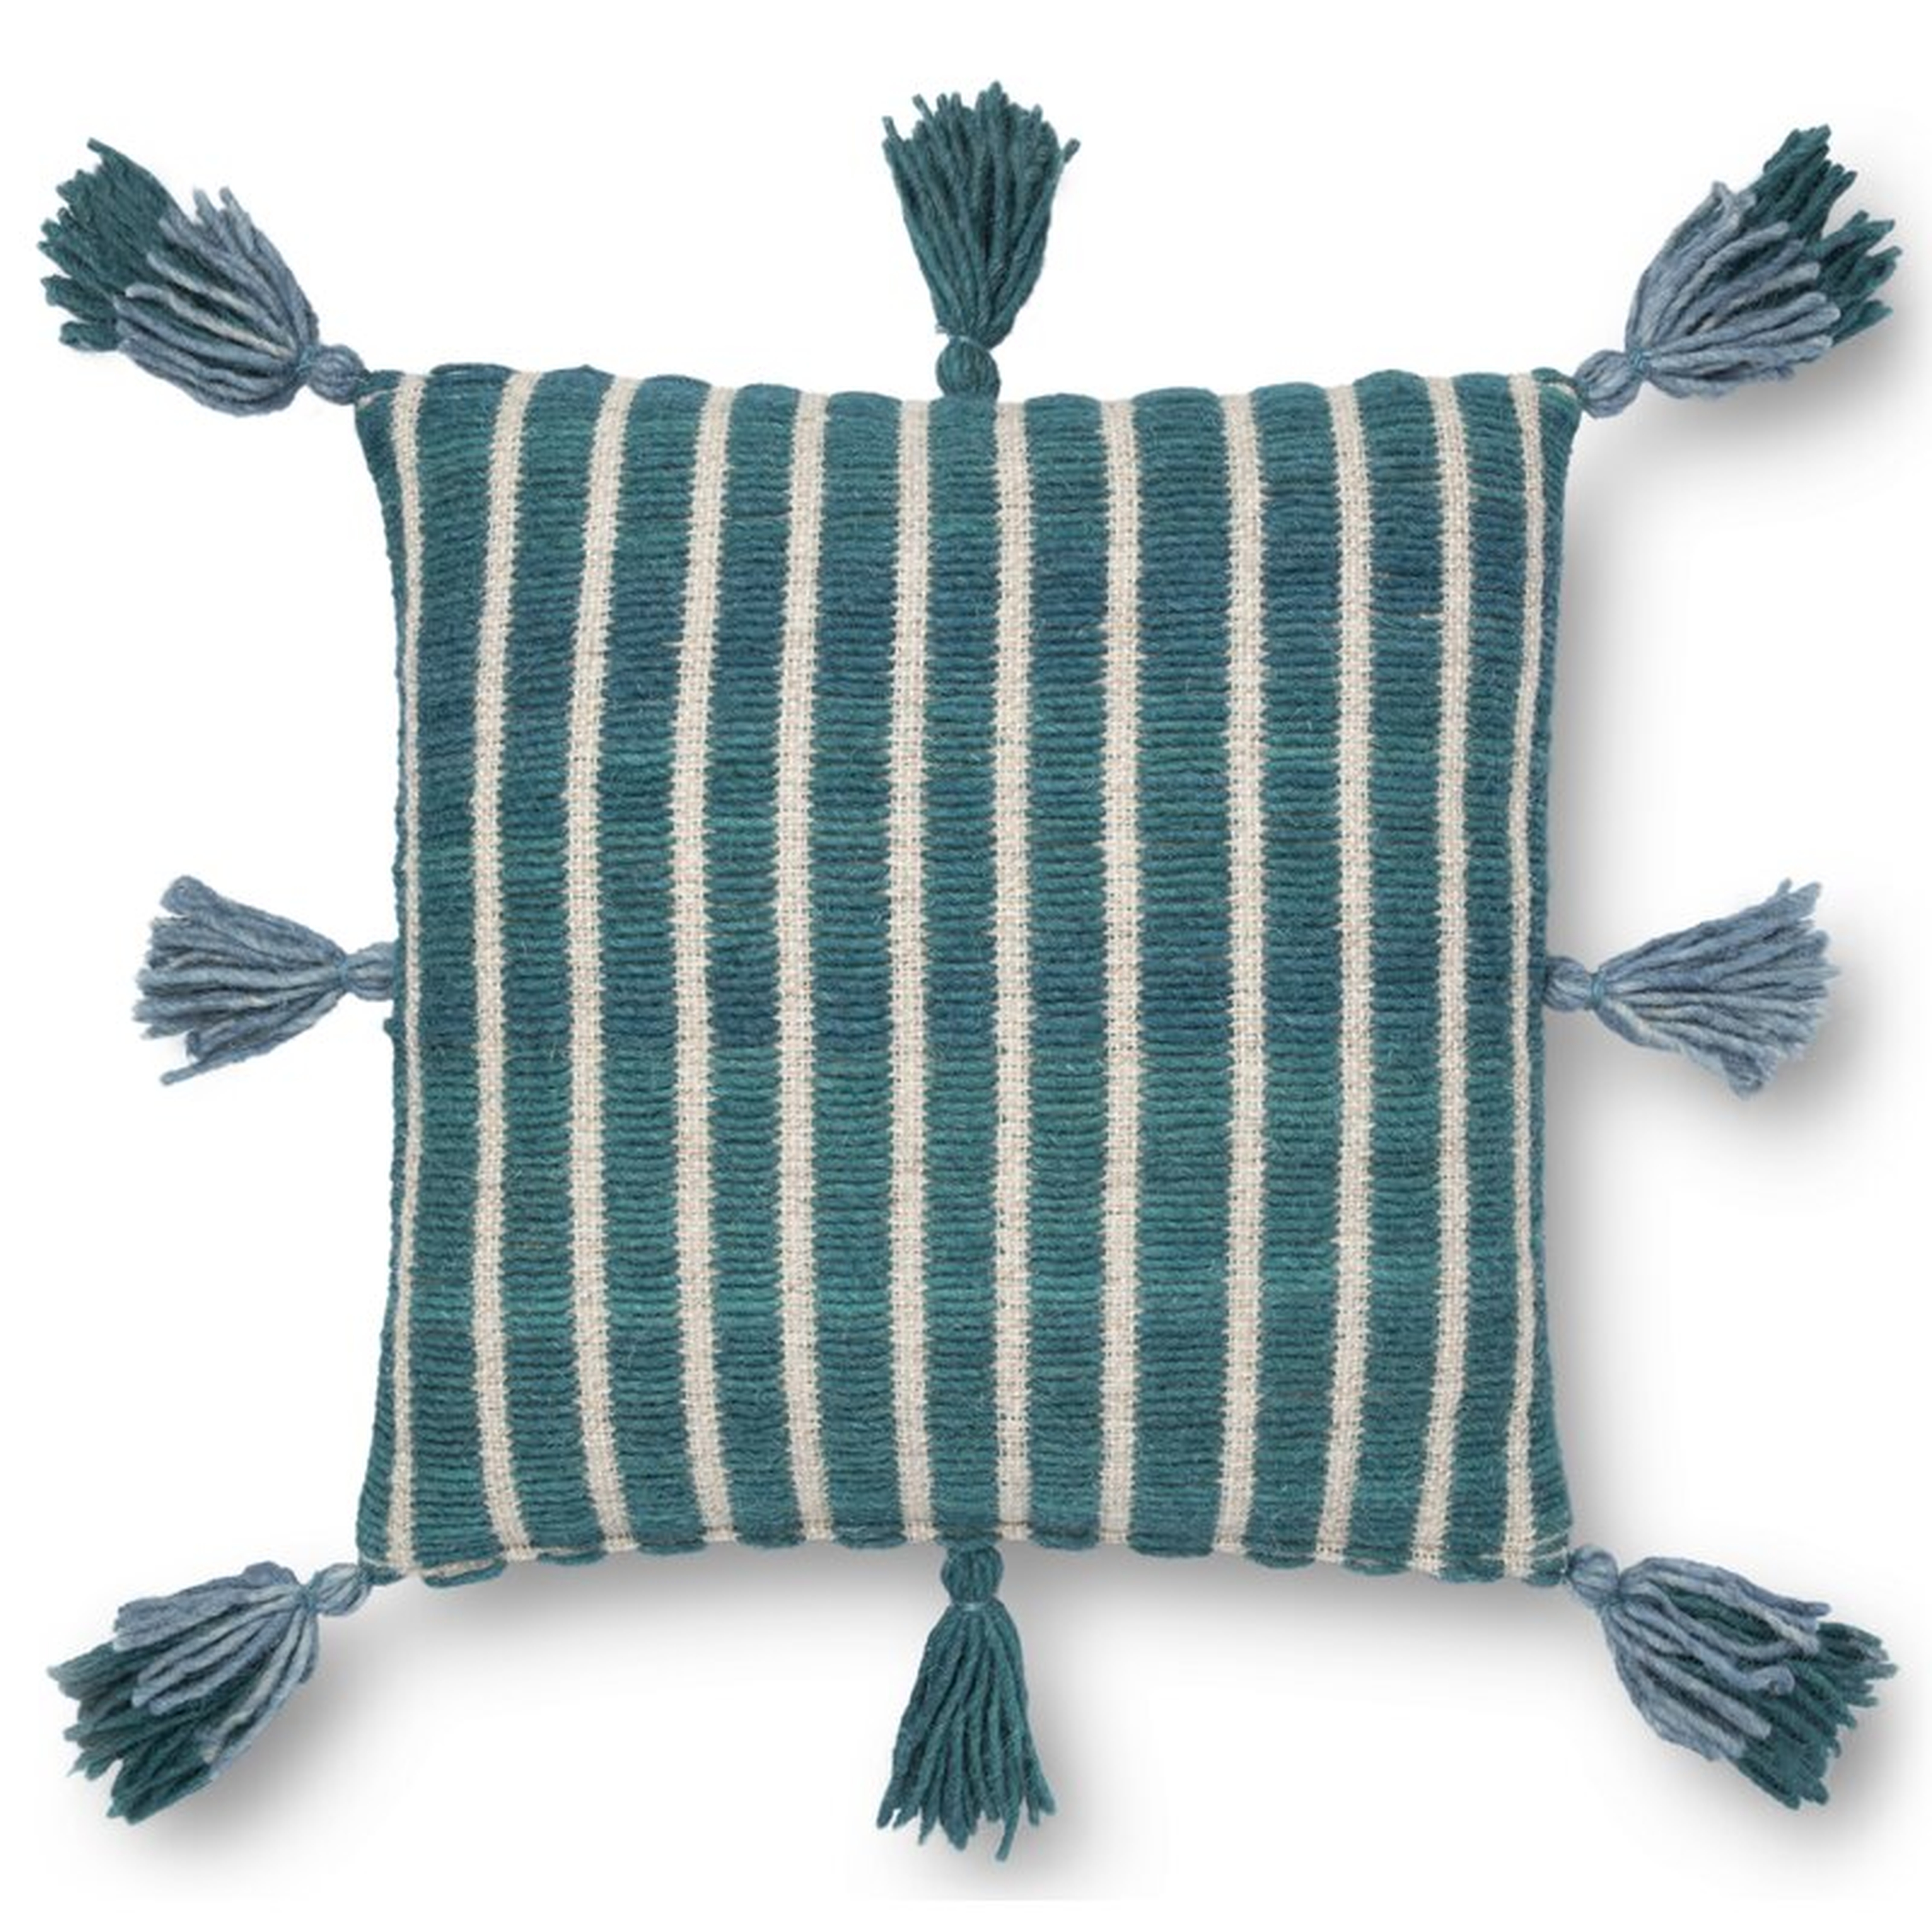 Striped Throw Pillow Cover Color: Blue/Teal, Size: 18" x 18" - Perigold